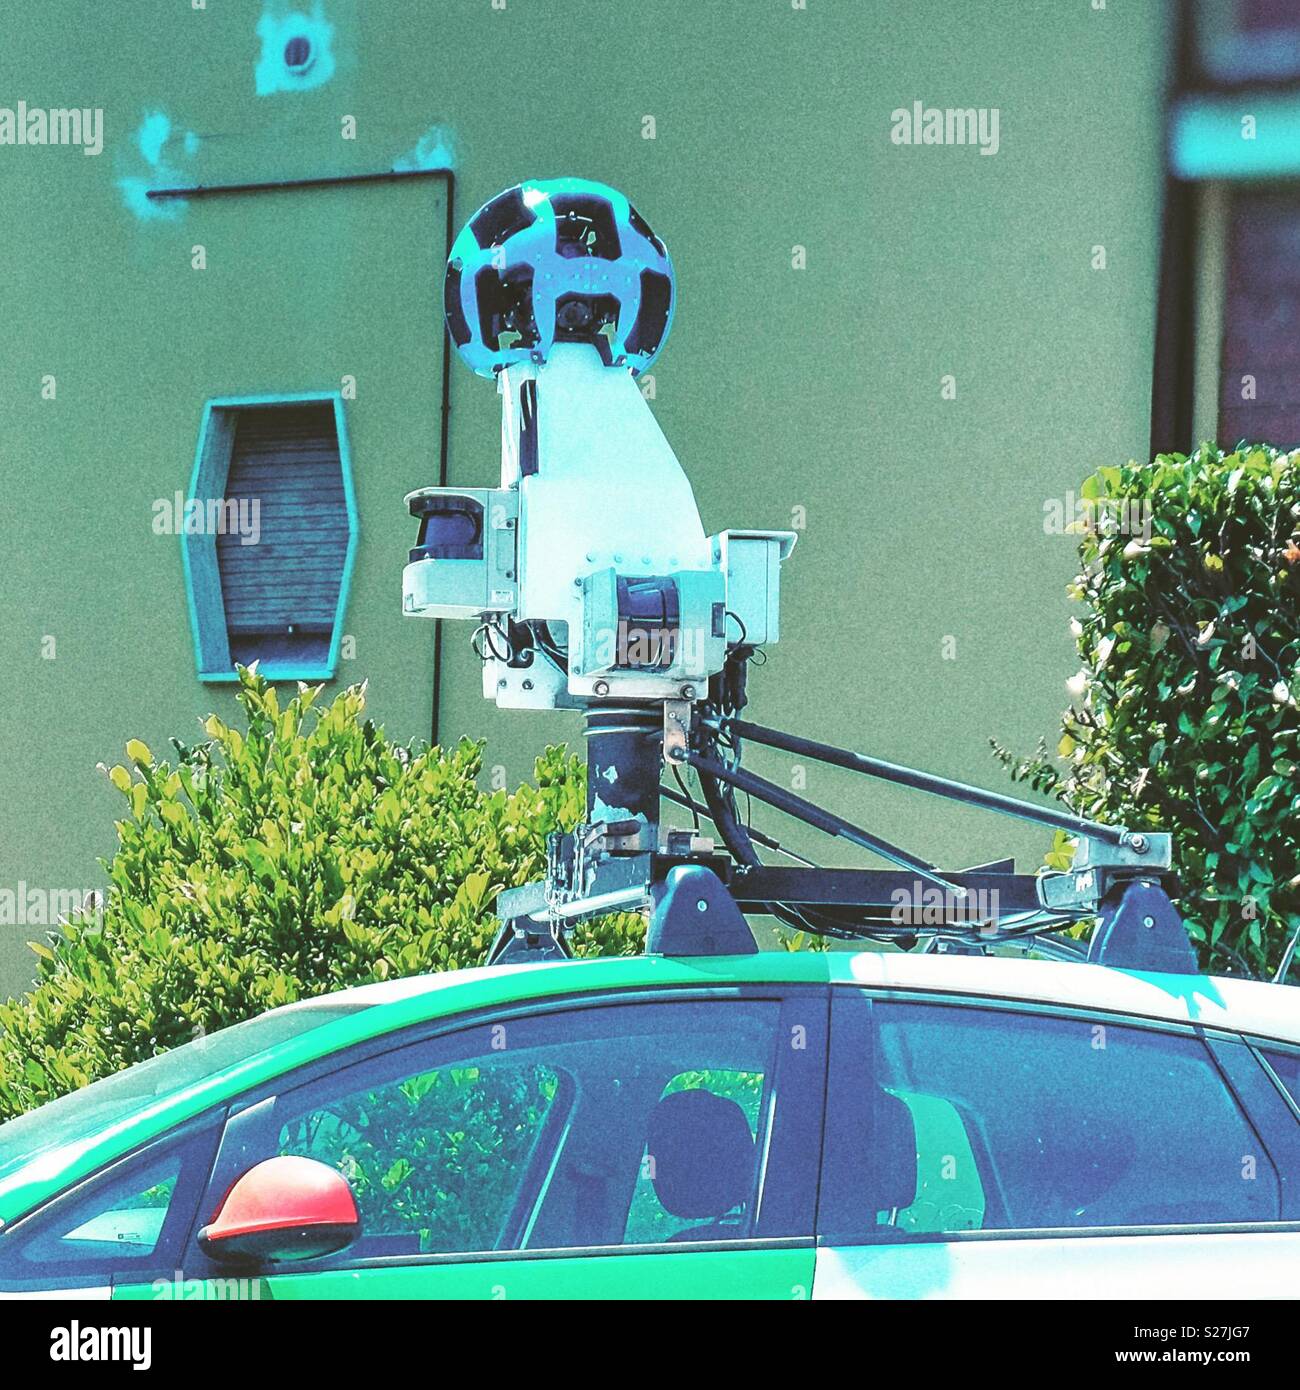 Google camera in street view car mapping device Stock Photo